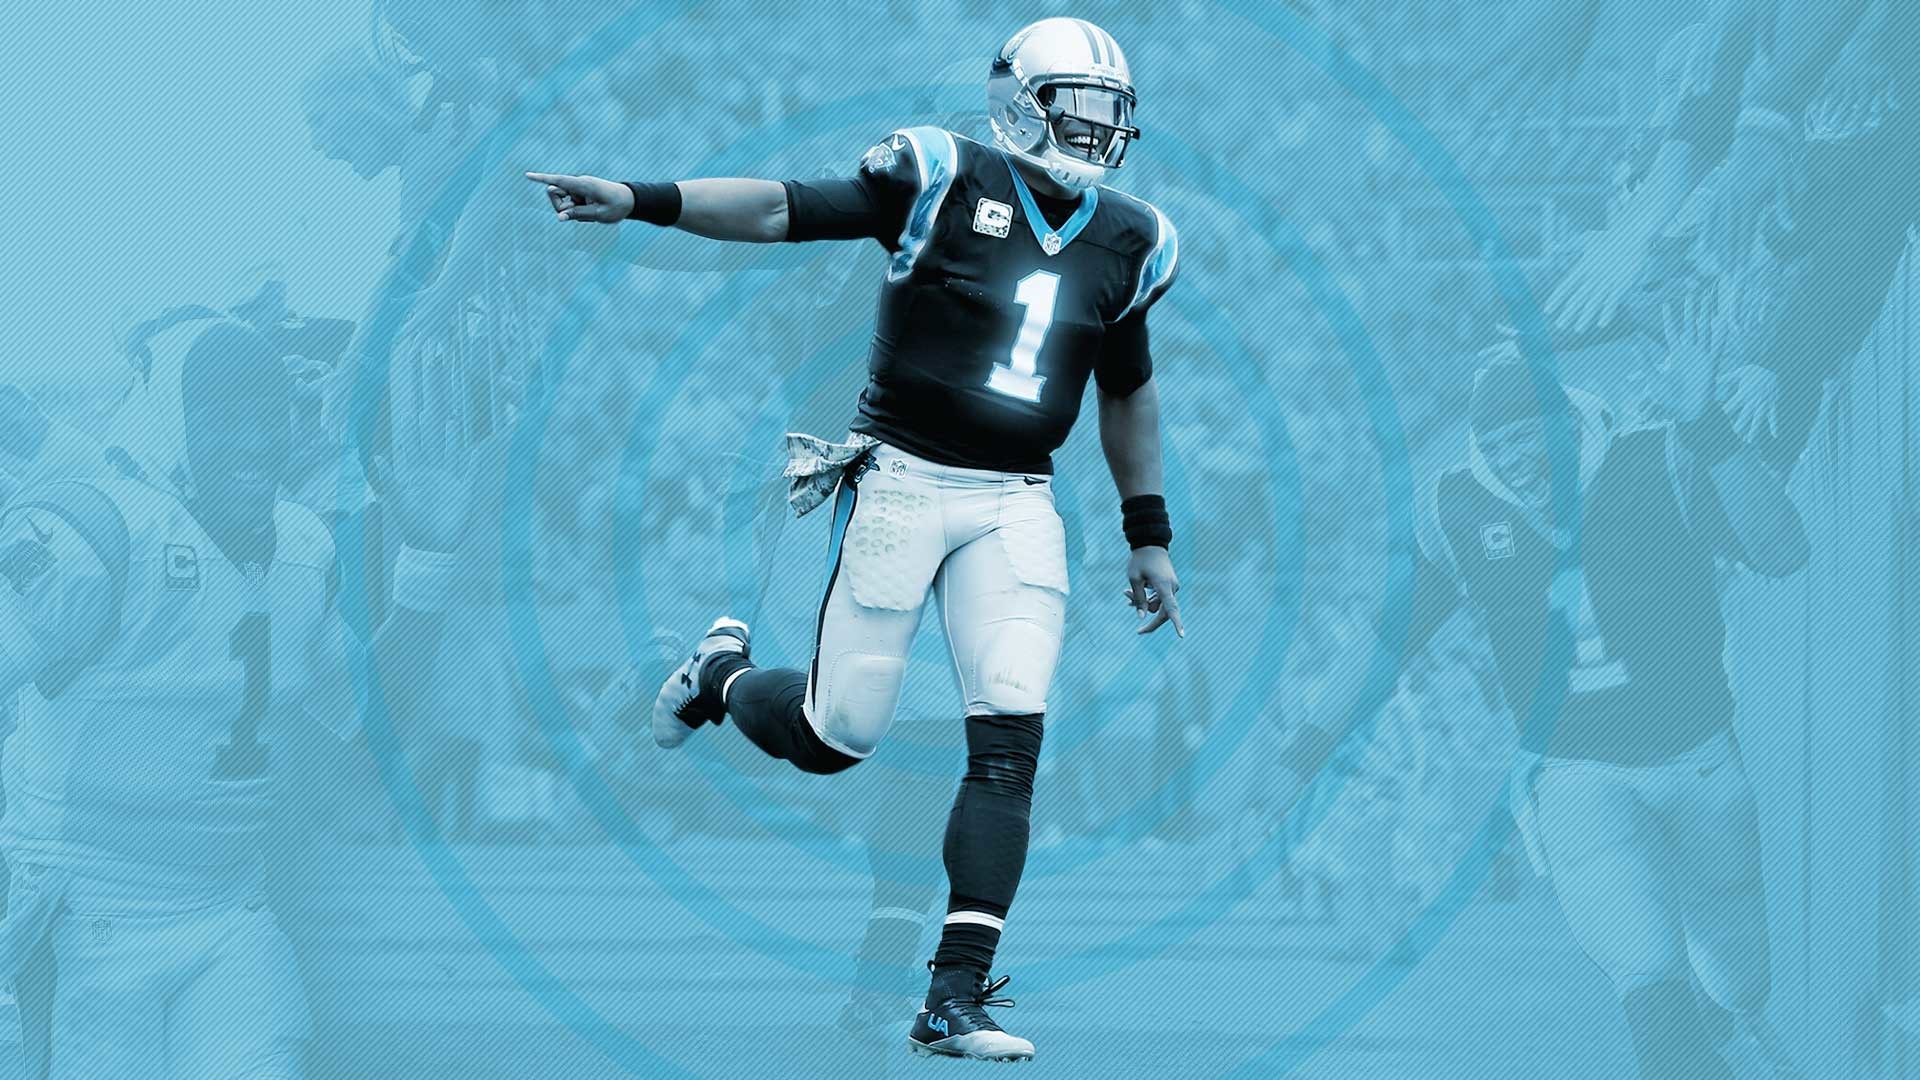 1920x1080 Cam Newton: Panthers' champion, a community's prince | NFL | Sporting News